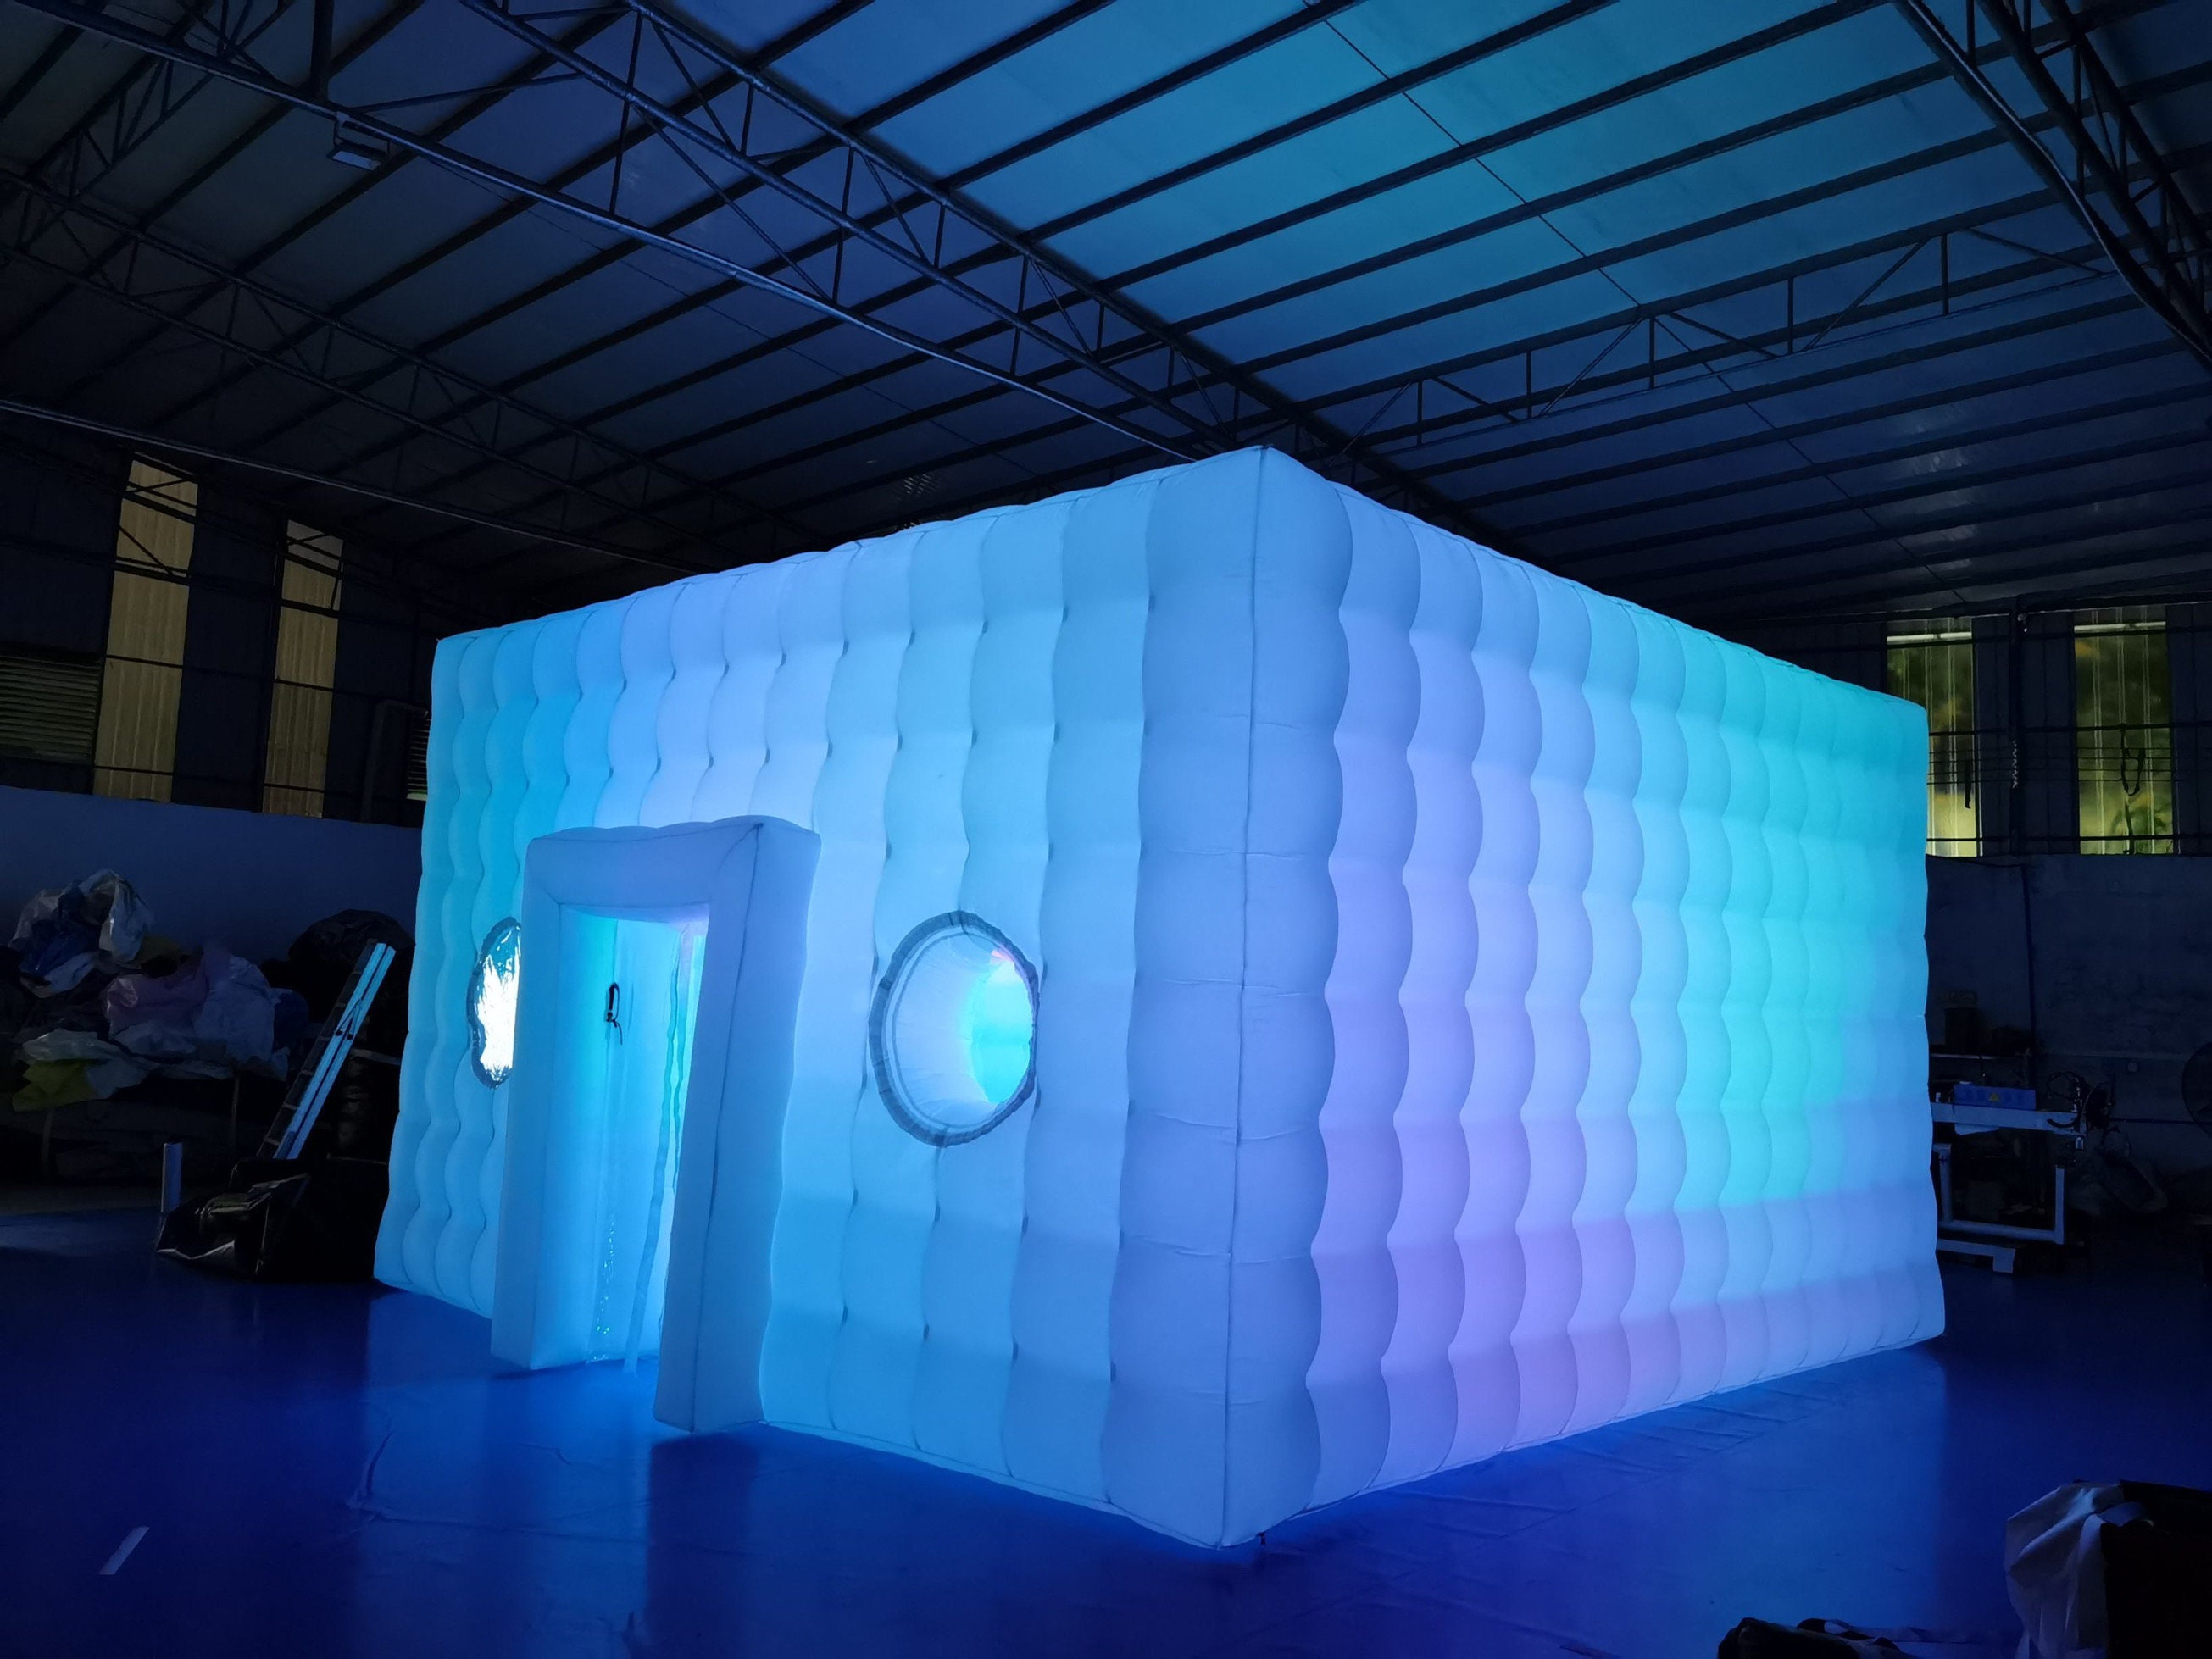 Rent an Inflatable Nightclub for Your Next Party: Create a Unique and Unforgettable Experience for Your Guests